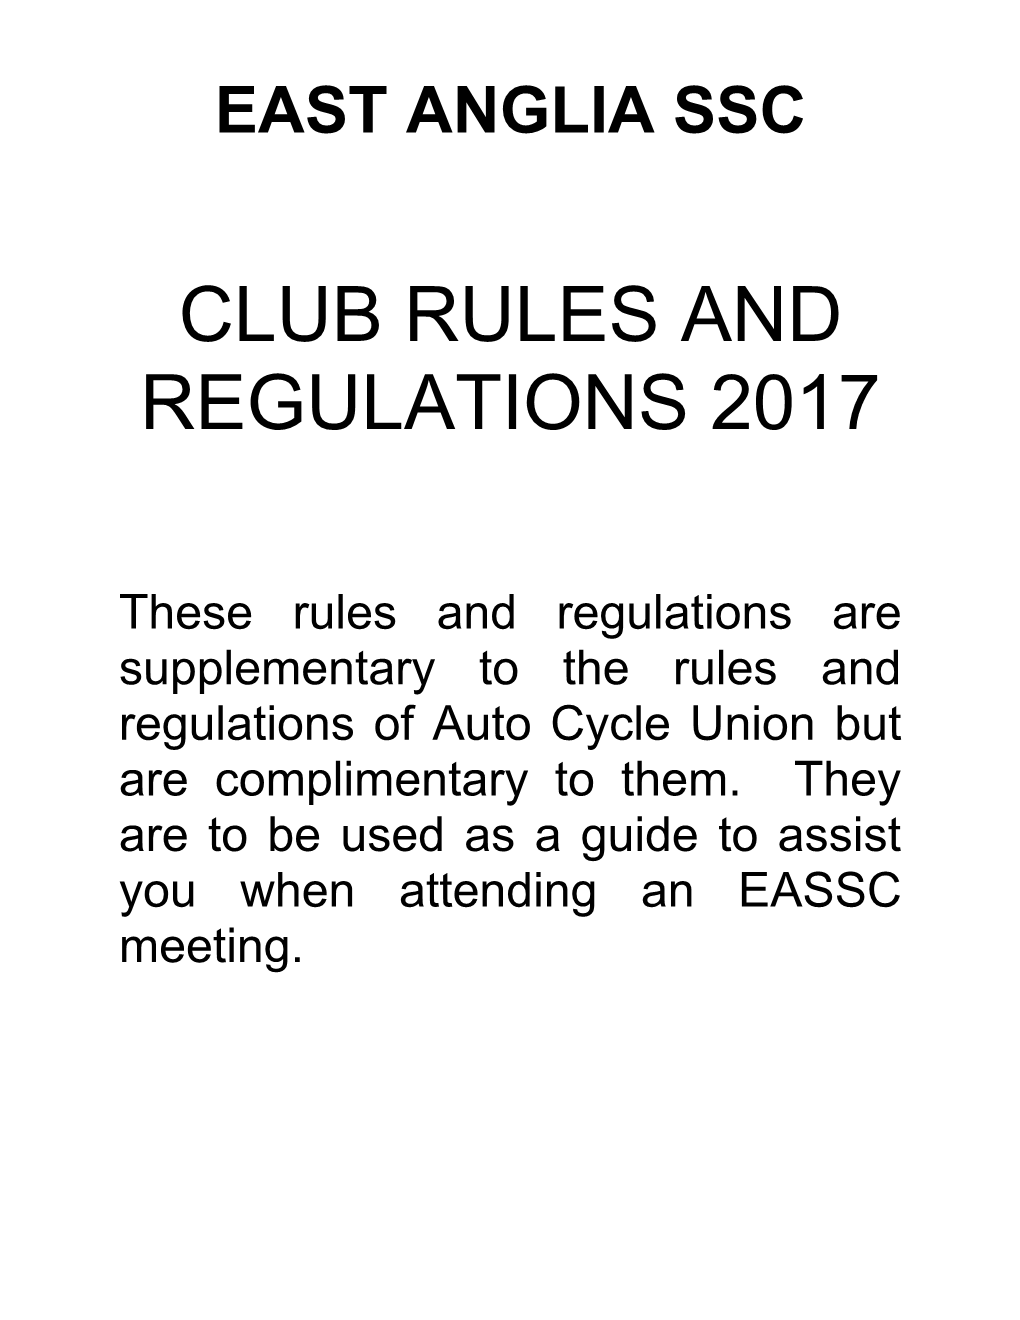 Club Rules and Regulations 2017